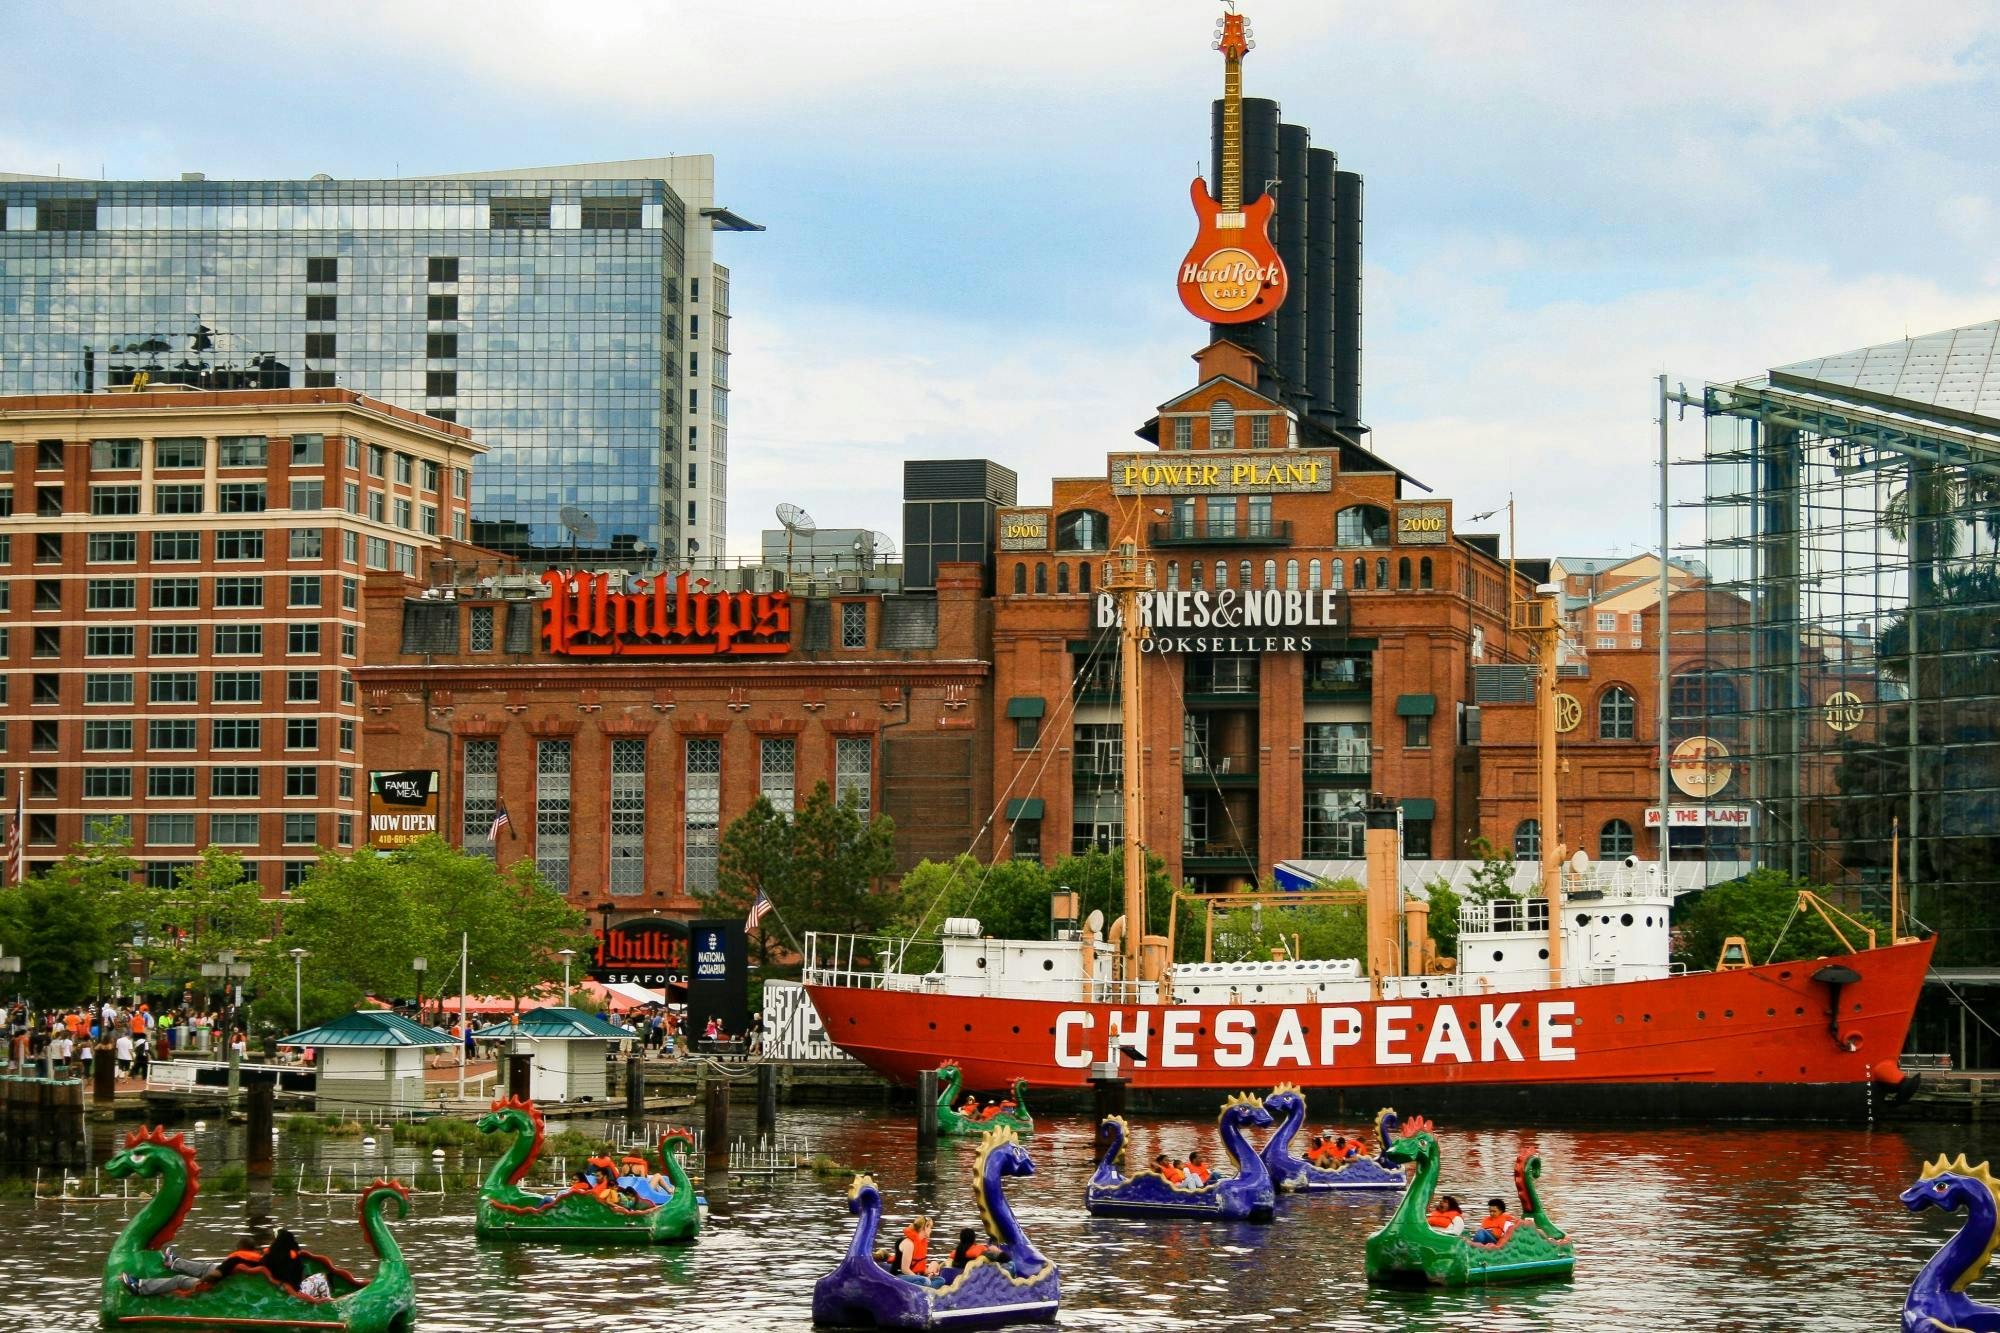 Lively Baltimore harbor with dragon boats flanked against old brick buildings